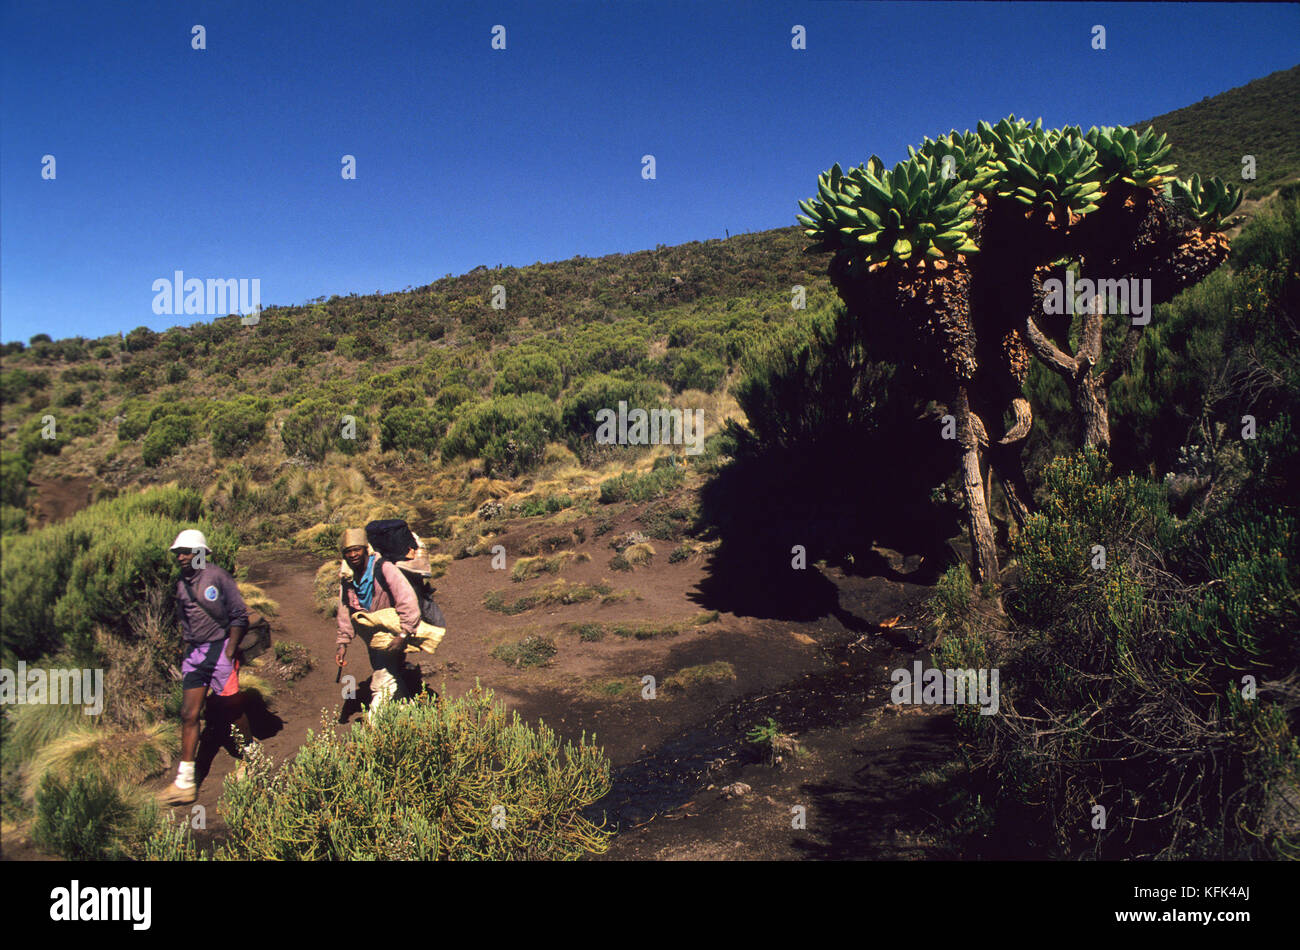 Giant Groundsels abounds near the path going to the top, Mt. Kilimanjaro National Park, Tanzania Stock Photo